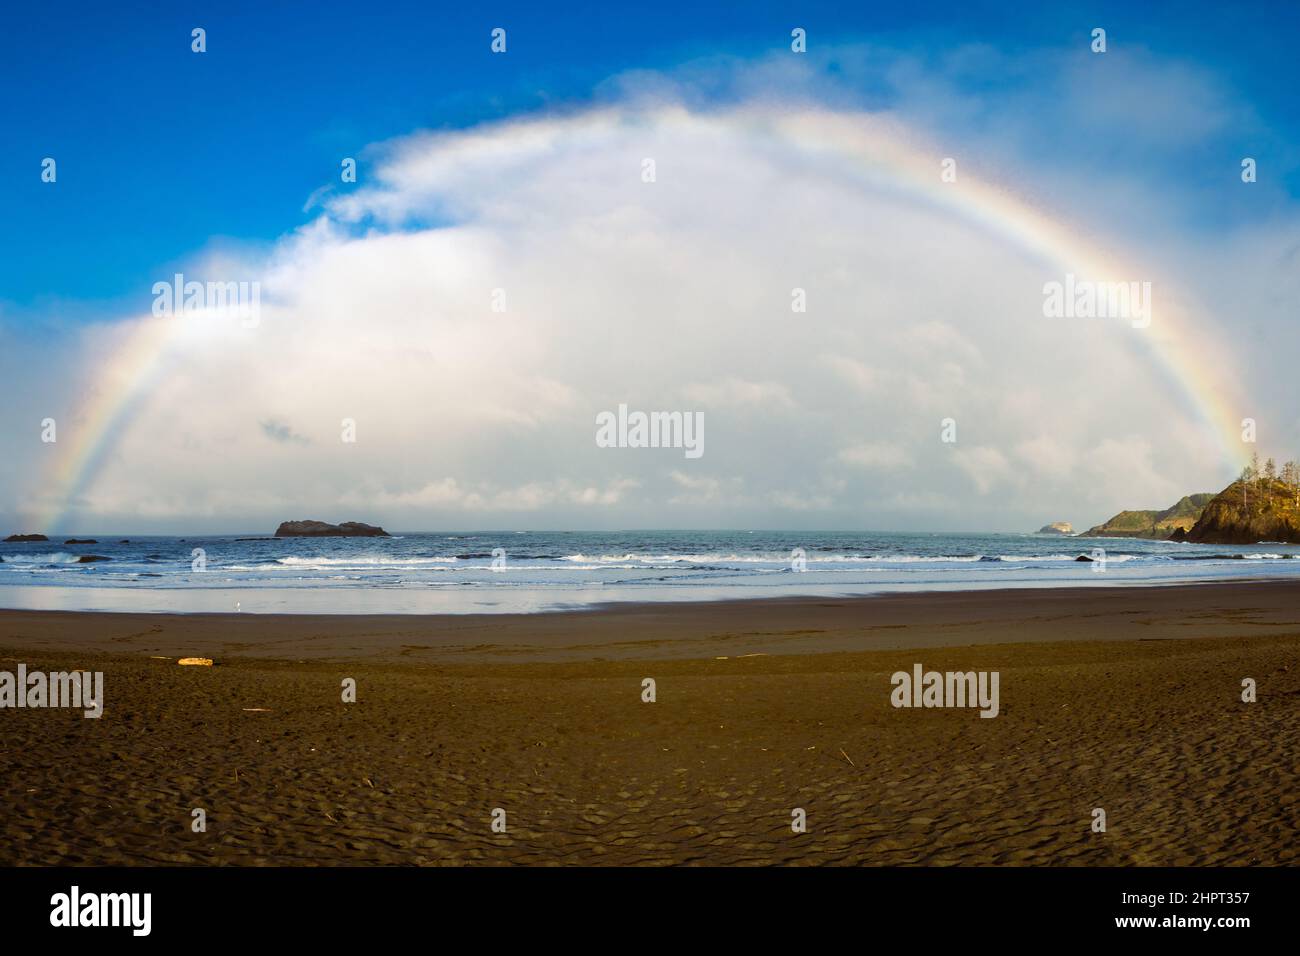 Rainbow over the ocean stretching from Pewetole Island out in to the sea.  Photographed at Trinidad State Beach, Trinidad, California, USA. Stock Photo